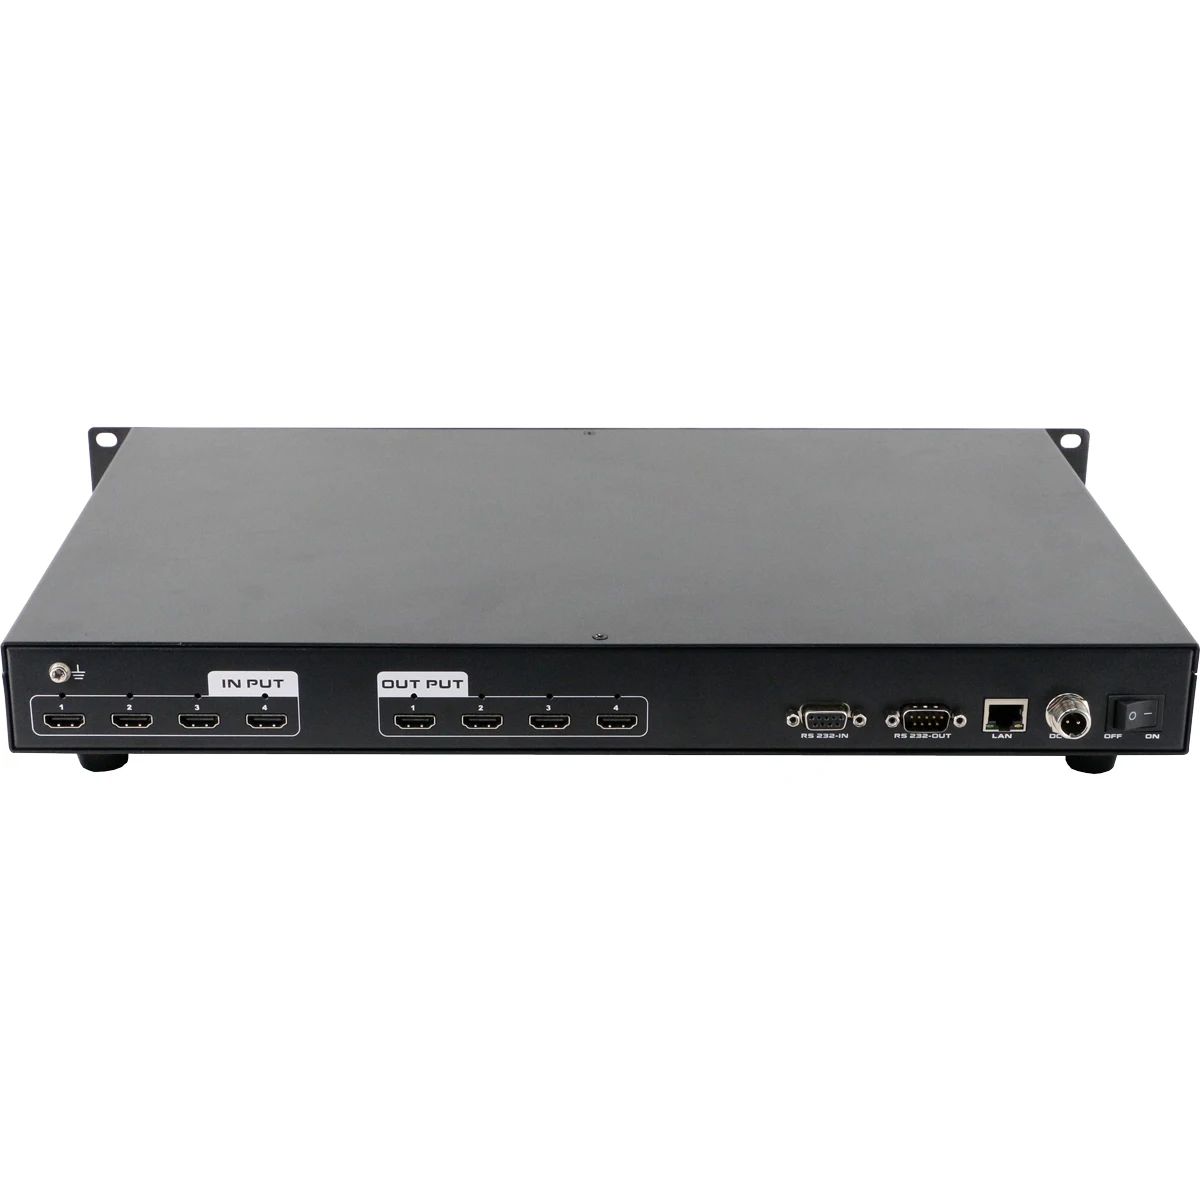 

HDCP compliant Switcher New Fixed 4K2K HDMI Matrix Switcher Can Work With The Blu-Ray Players